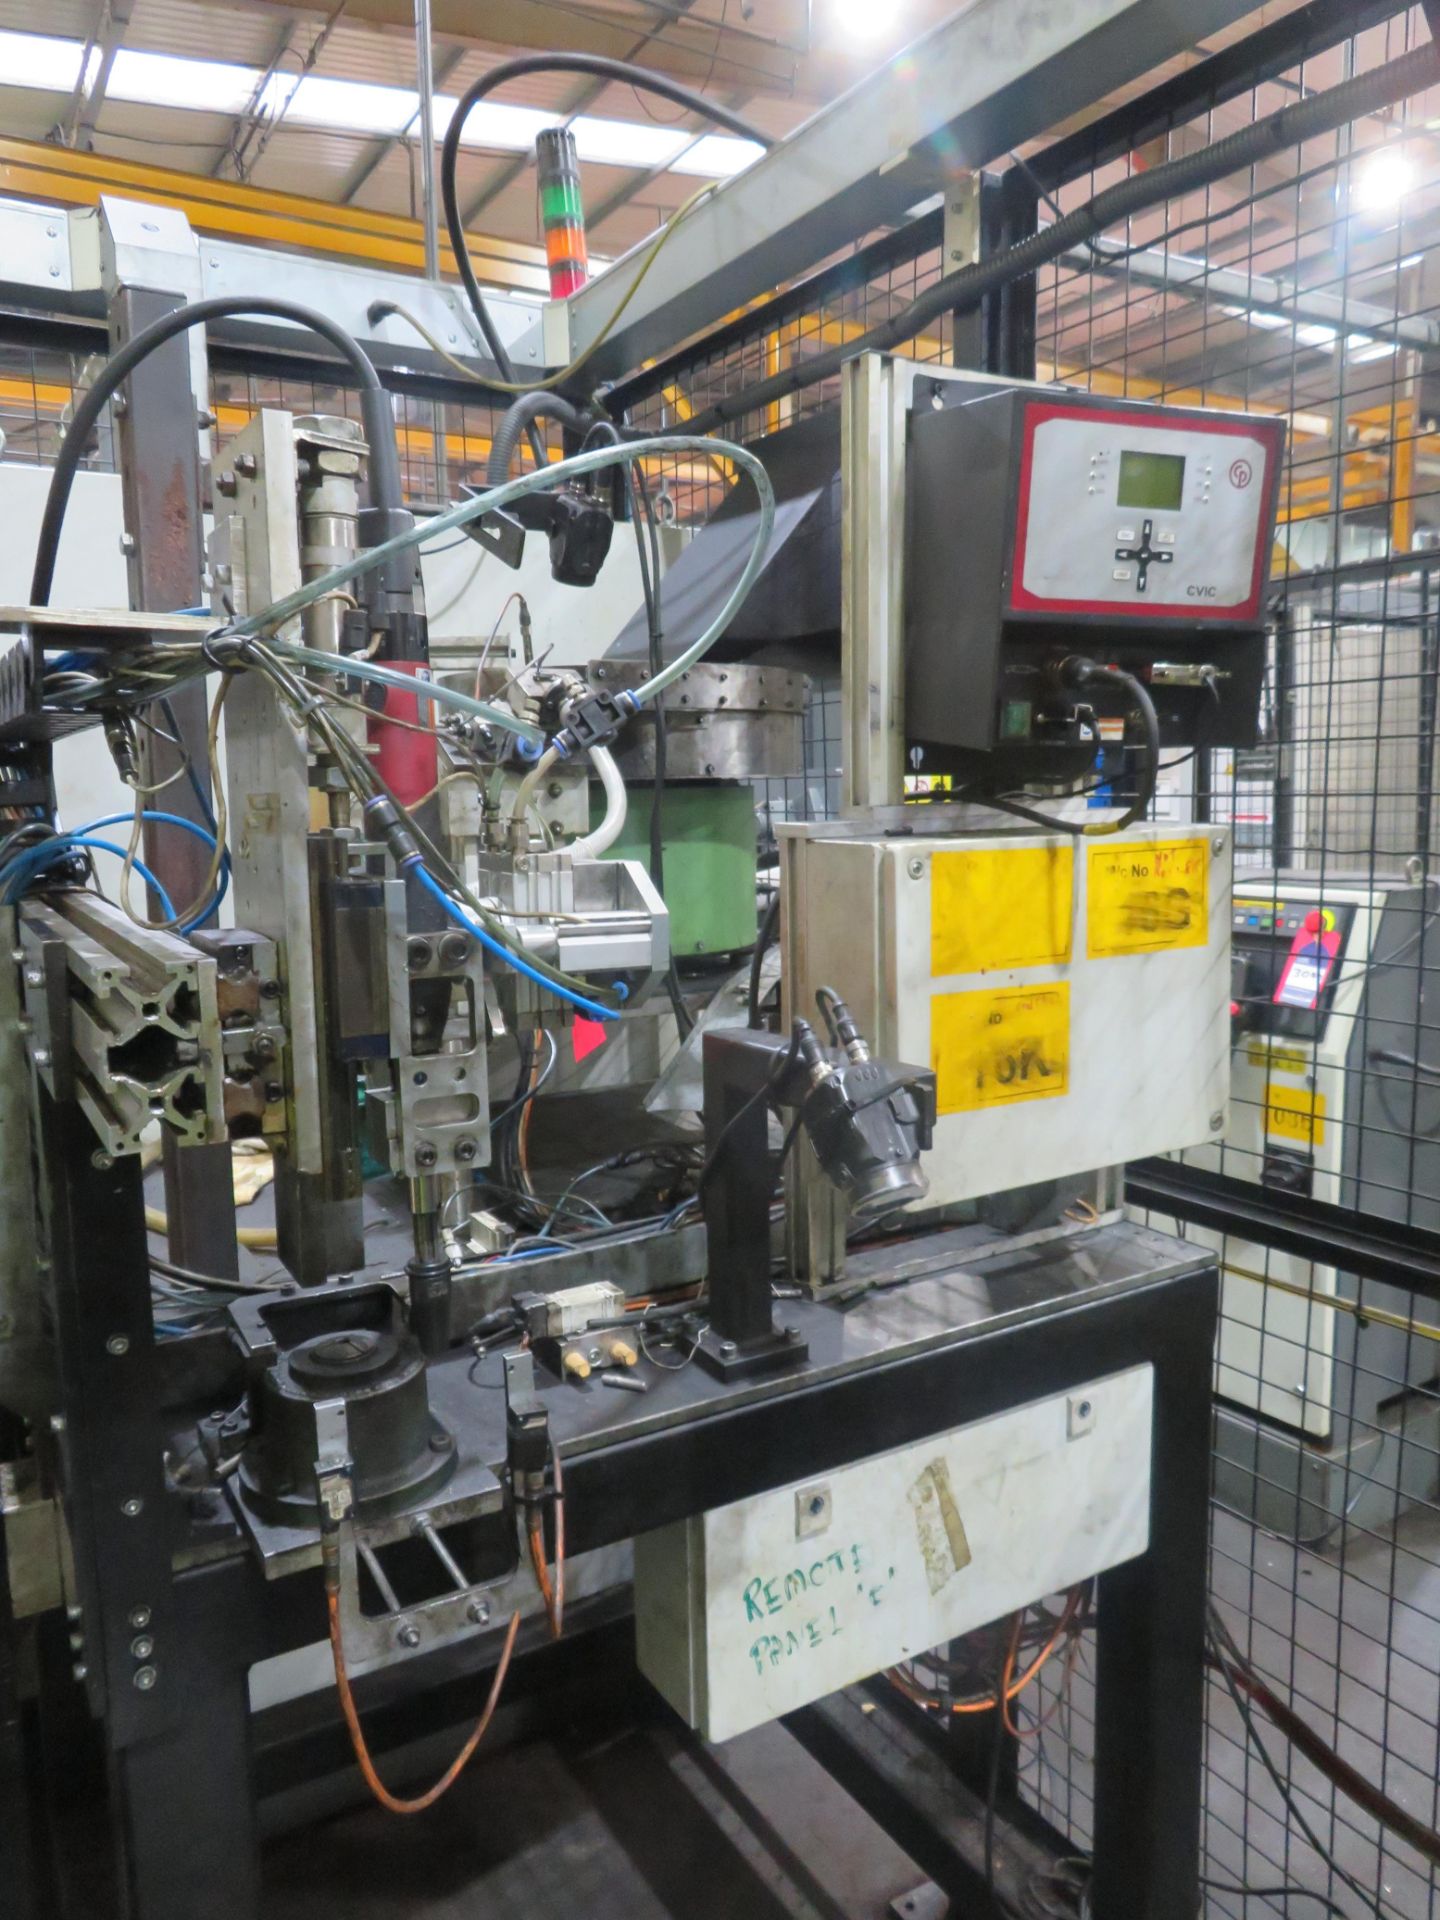 Fanuc Robot Cell (2 x Robots) - Image 5 of 12